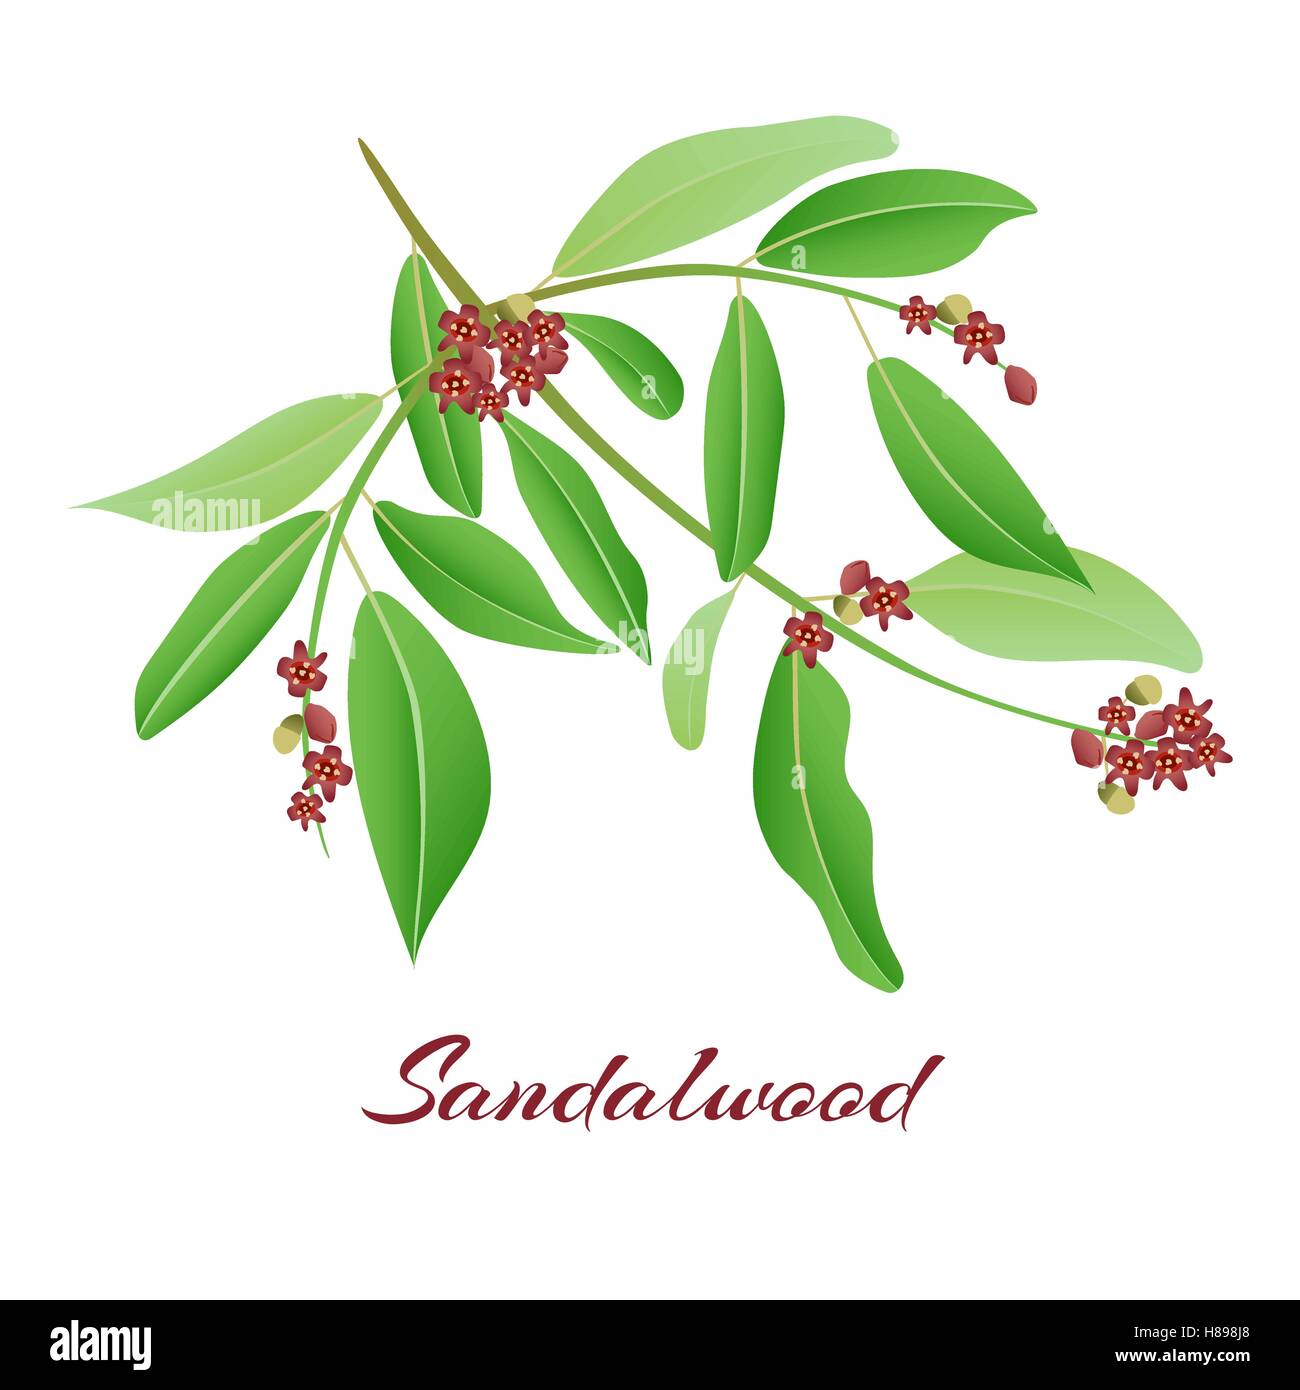 Sandalwood tree branch. with red flowers Vector illlustration. Stock Vector